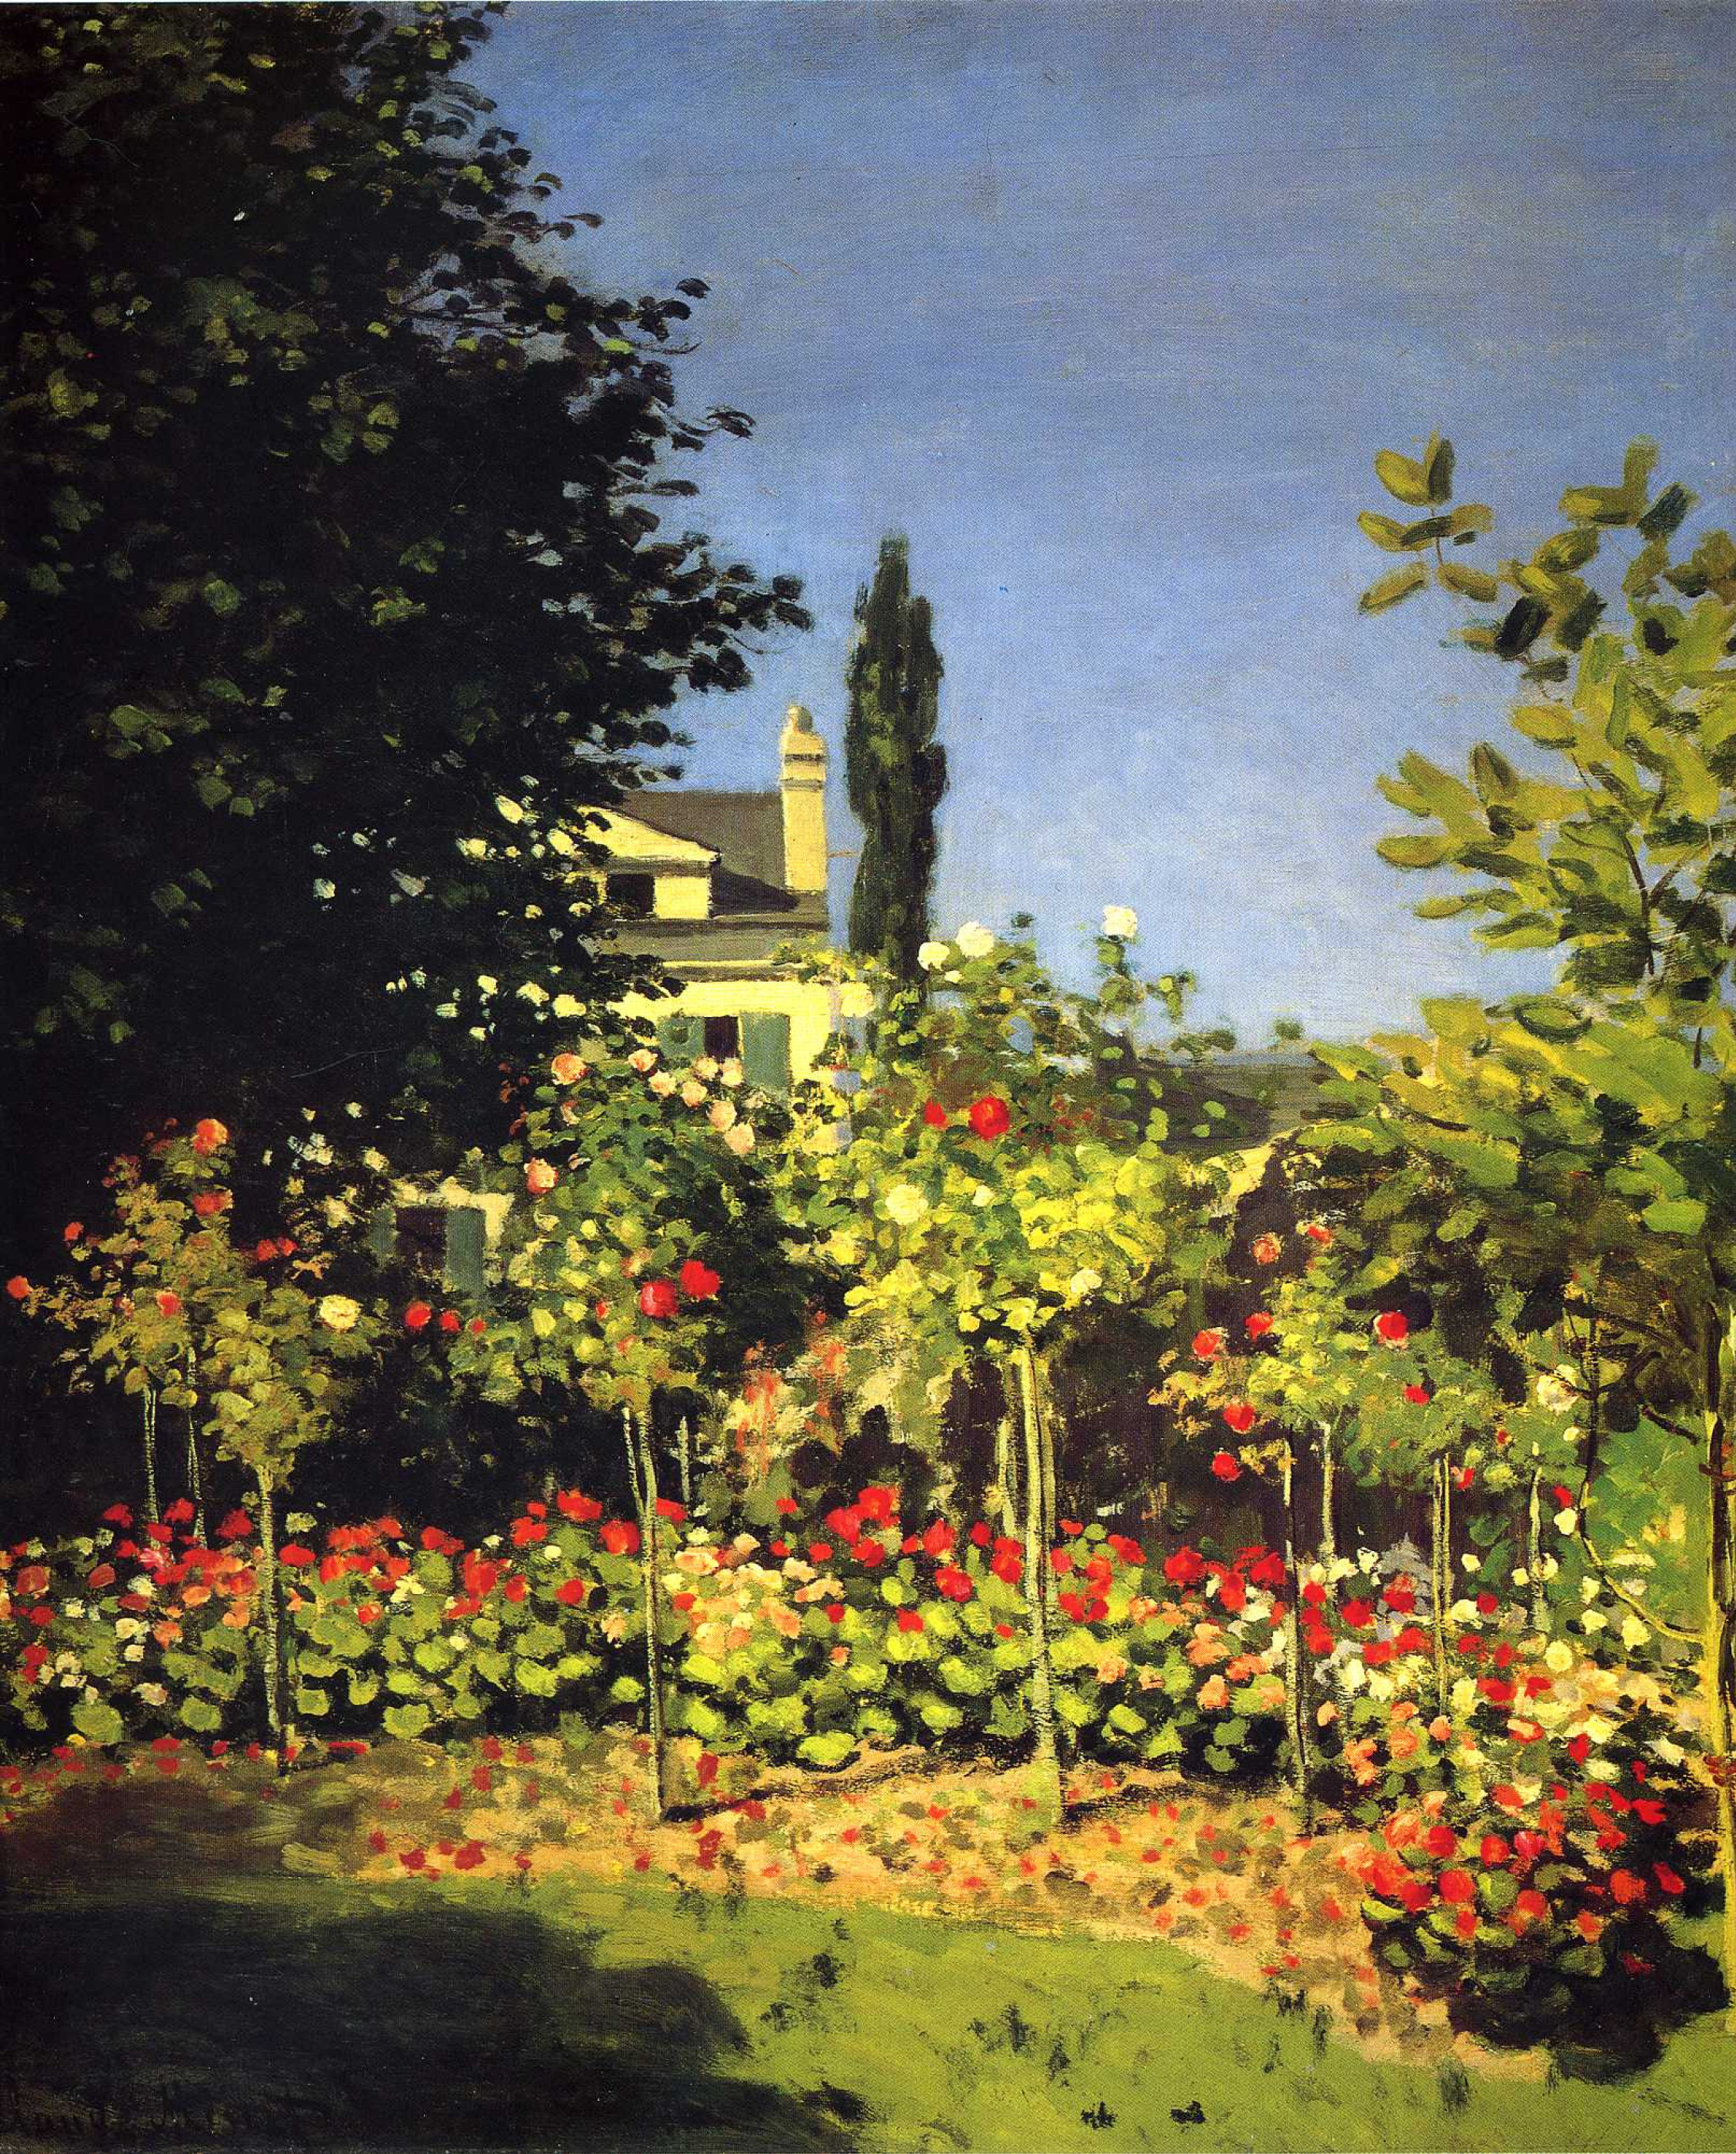 WOMEN IN THE GARDEN 1866 FLOWERS SPRING PAINTING BY CLAUDE MONET REPRO 